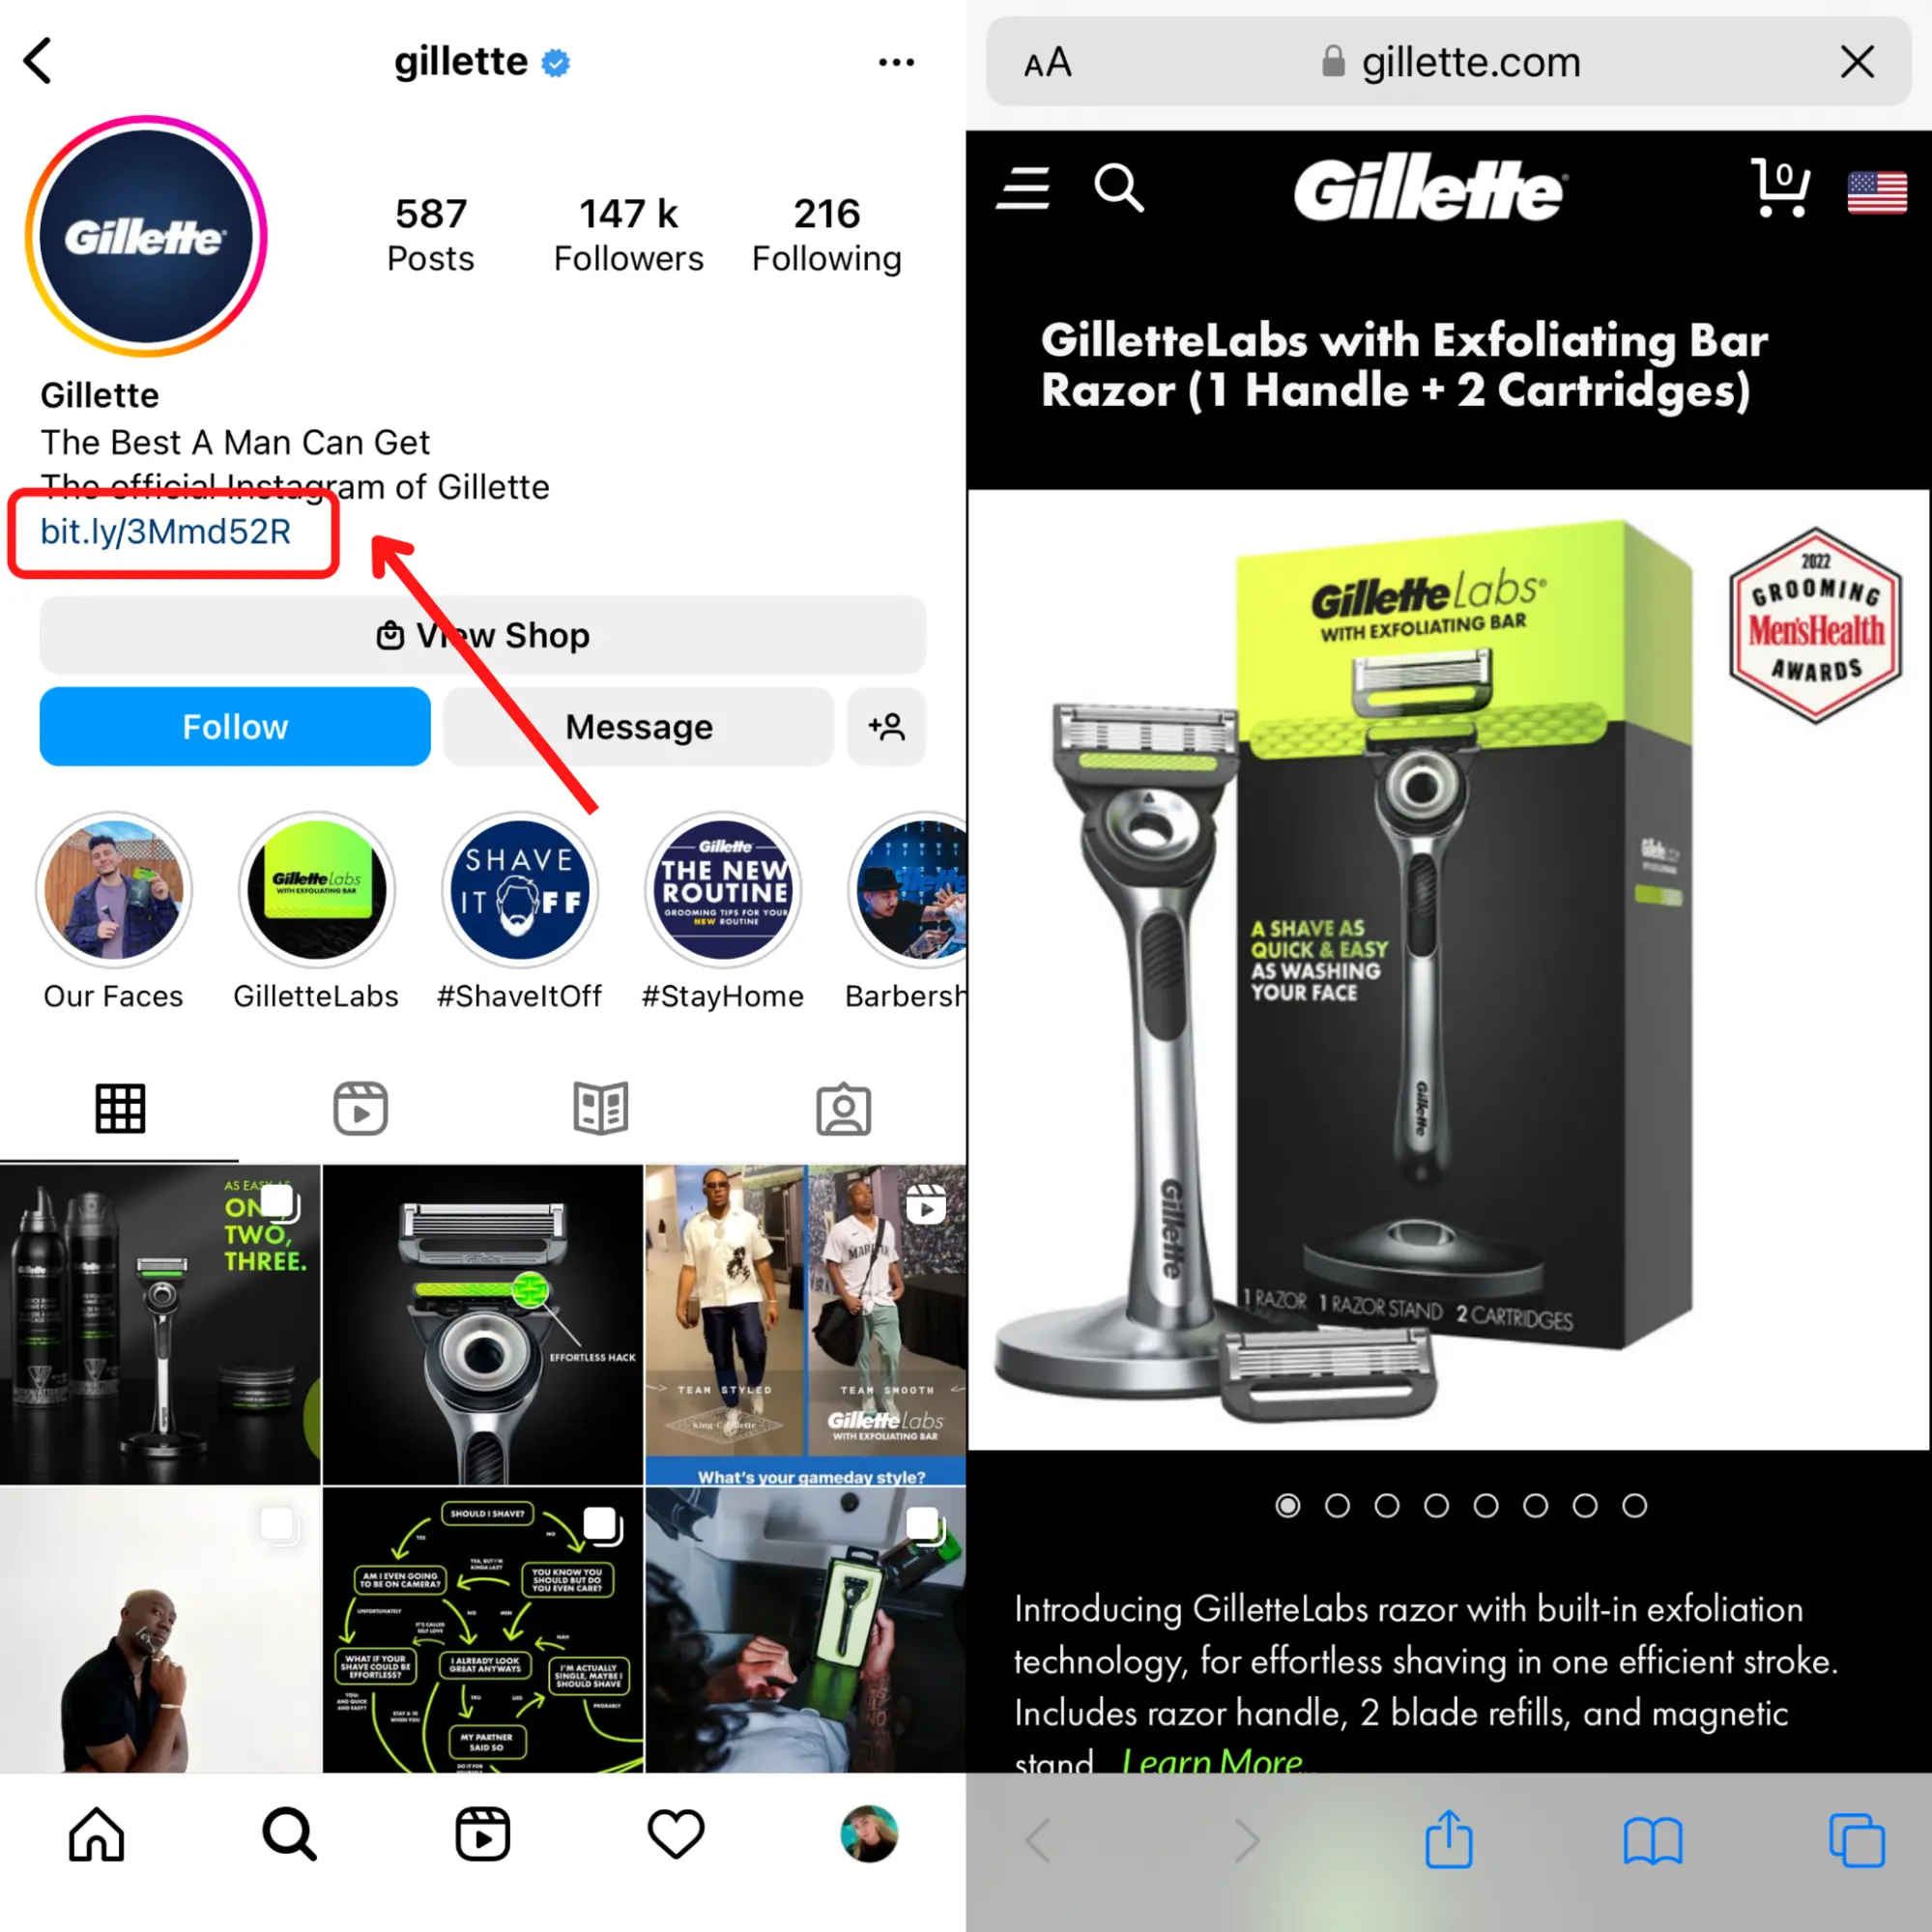 Screenshot of instagram page of Gillette and their link in bio 